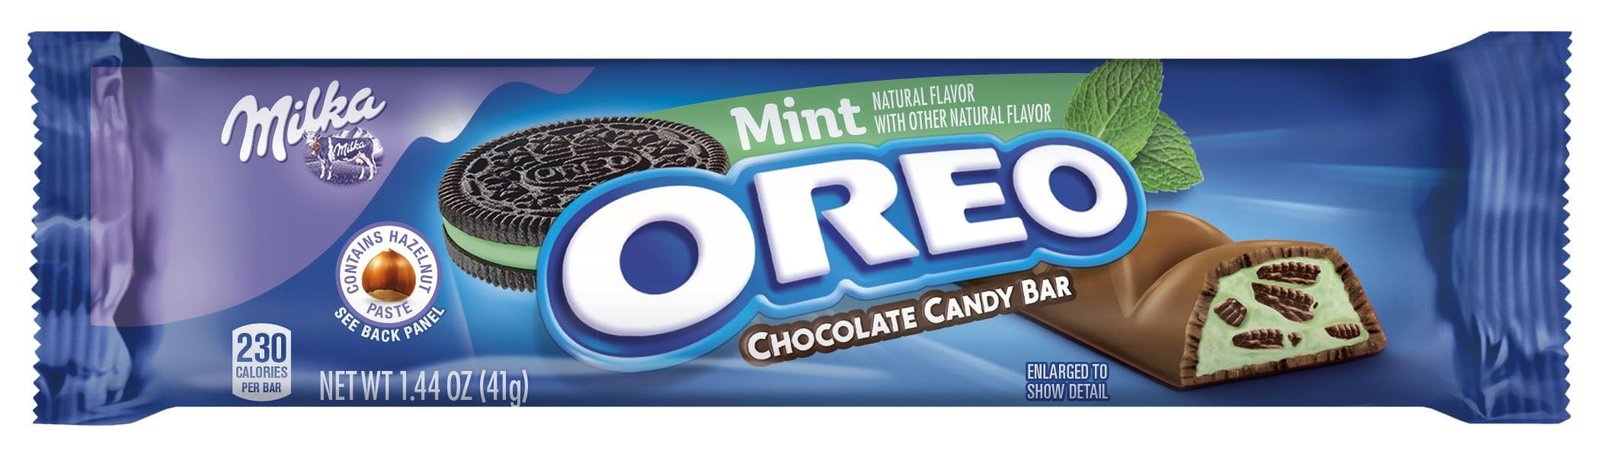 New Oreo And Milka Mint Flavored Chocolate Candy Bar